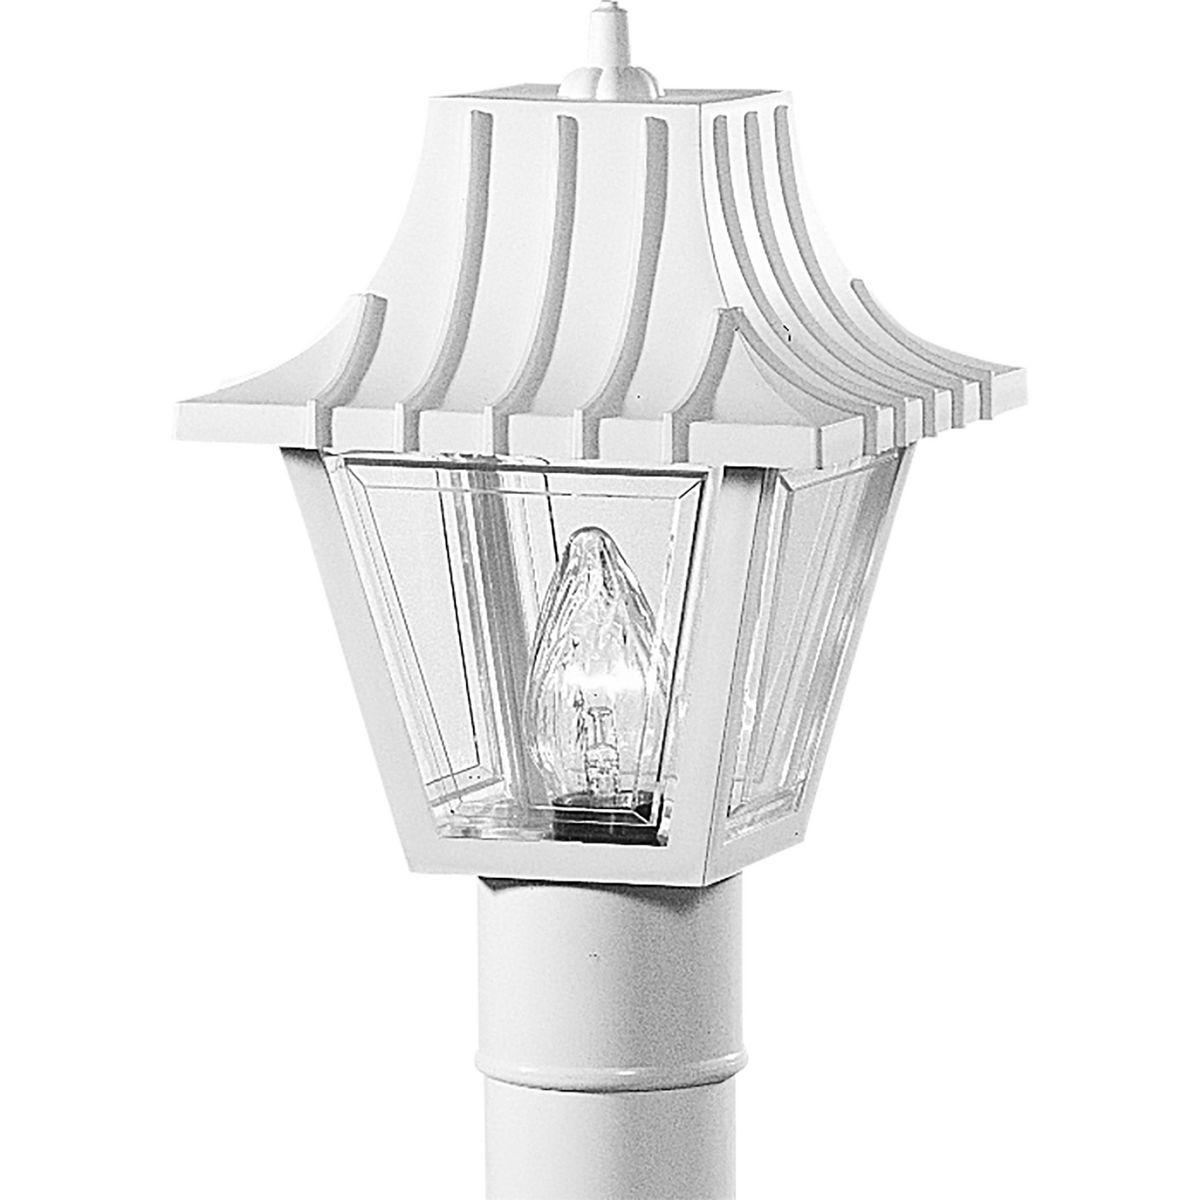 Hubbell P5414-30 Post lantern with ribbed mansard roof. Beveled clear acrylic panels. Polypropylene construction. Post top fits 3" post or pedestal mount.  ; Polypropylene construction. ; Beveled clear acrylic panels. ; Ribbed mansard roof style.